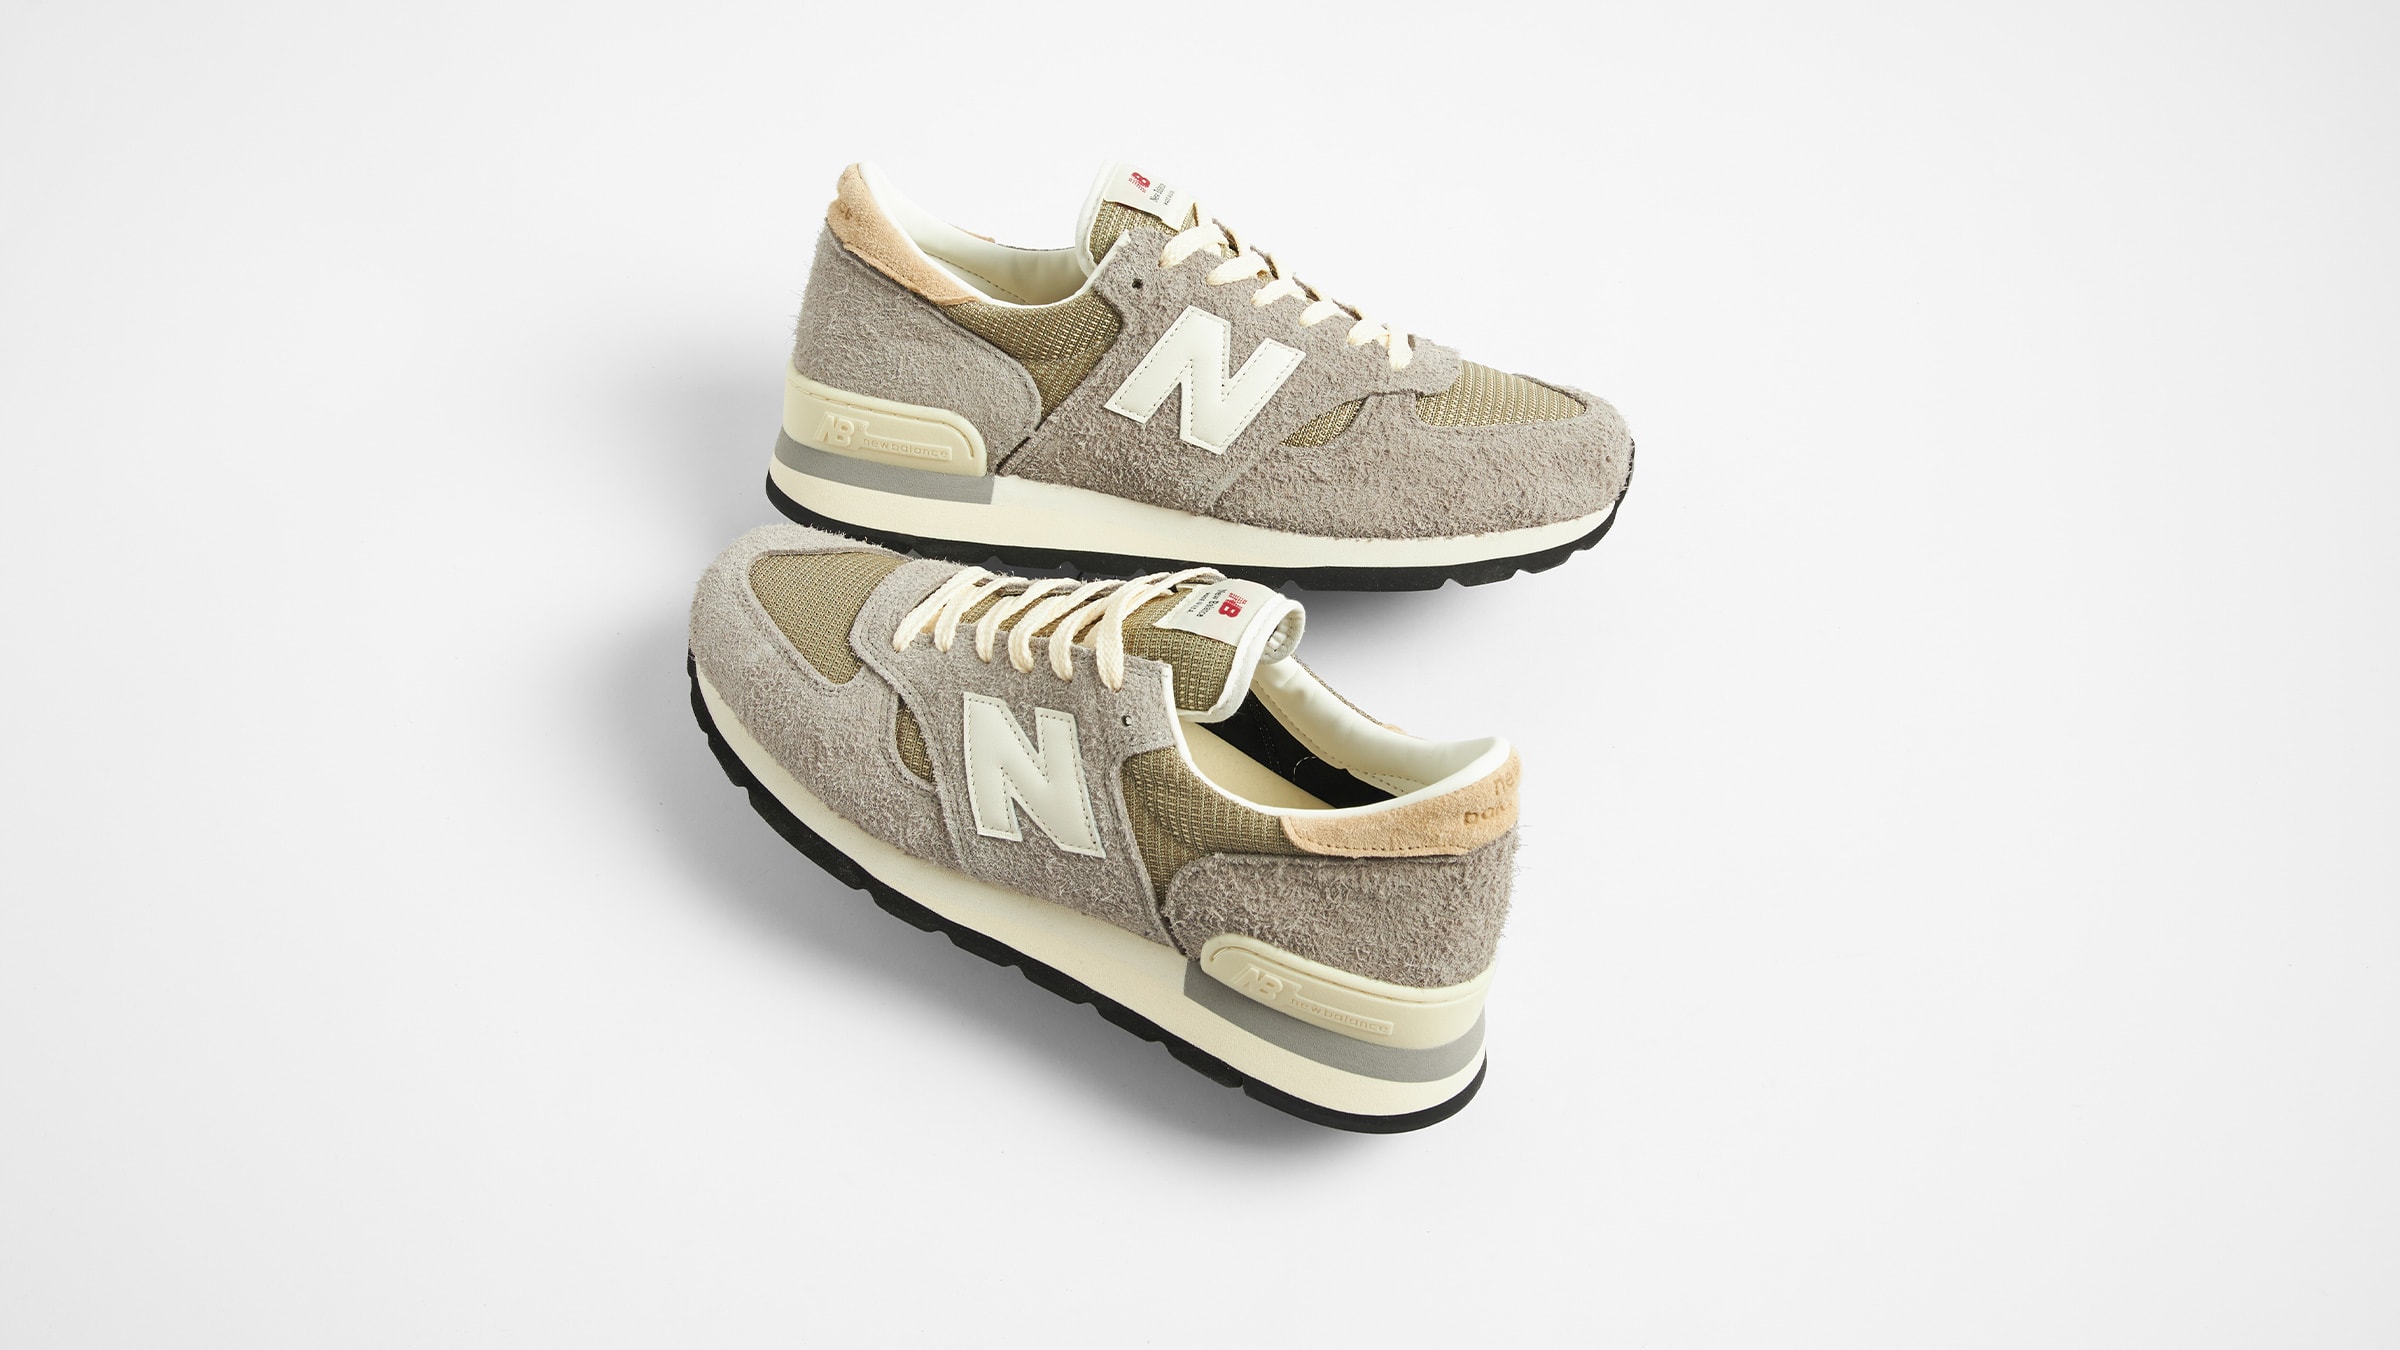 New Balance M990TA1 - Made in USA (Grey & Tan) | END. Launches